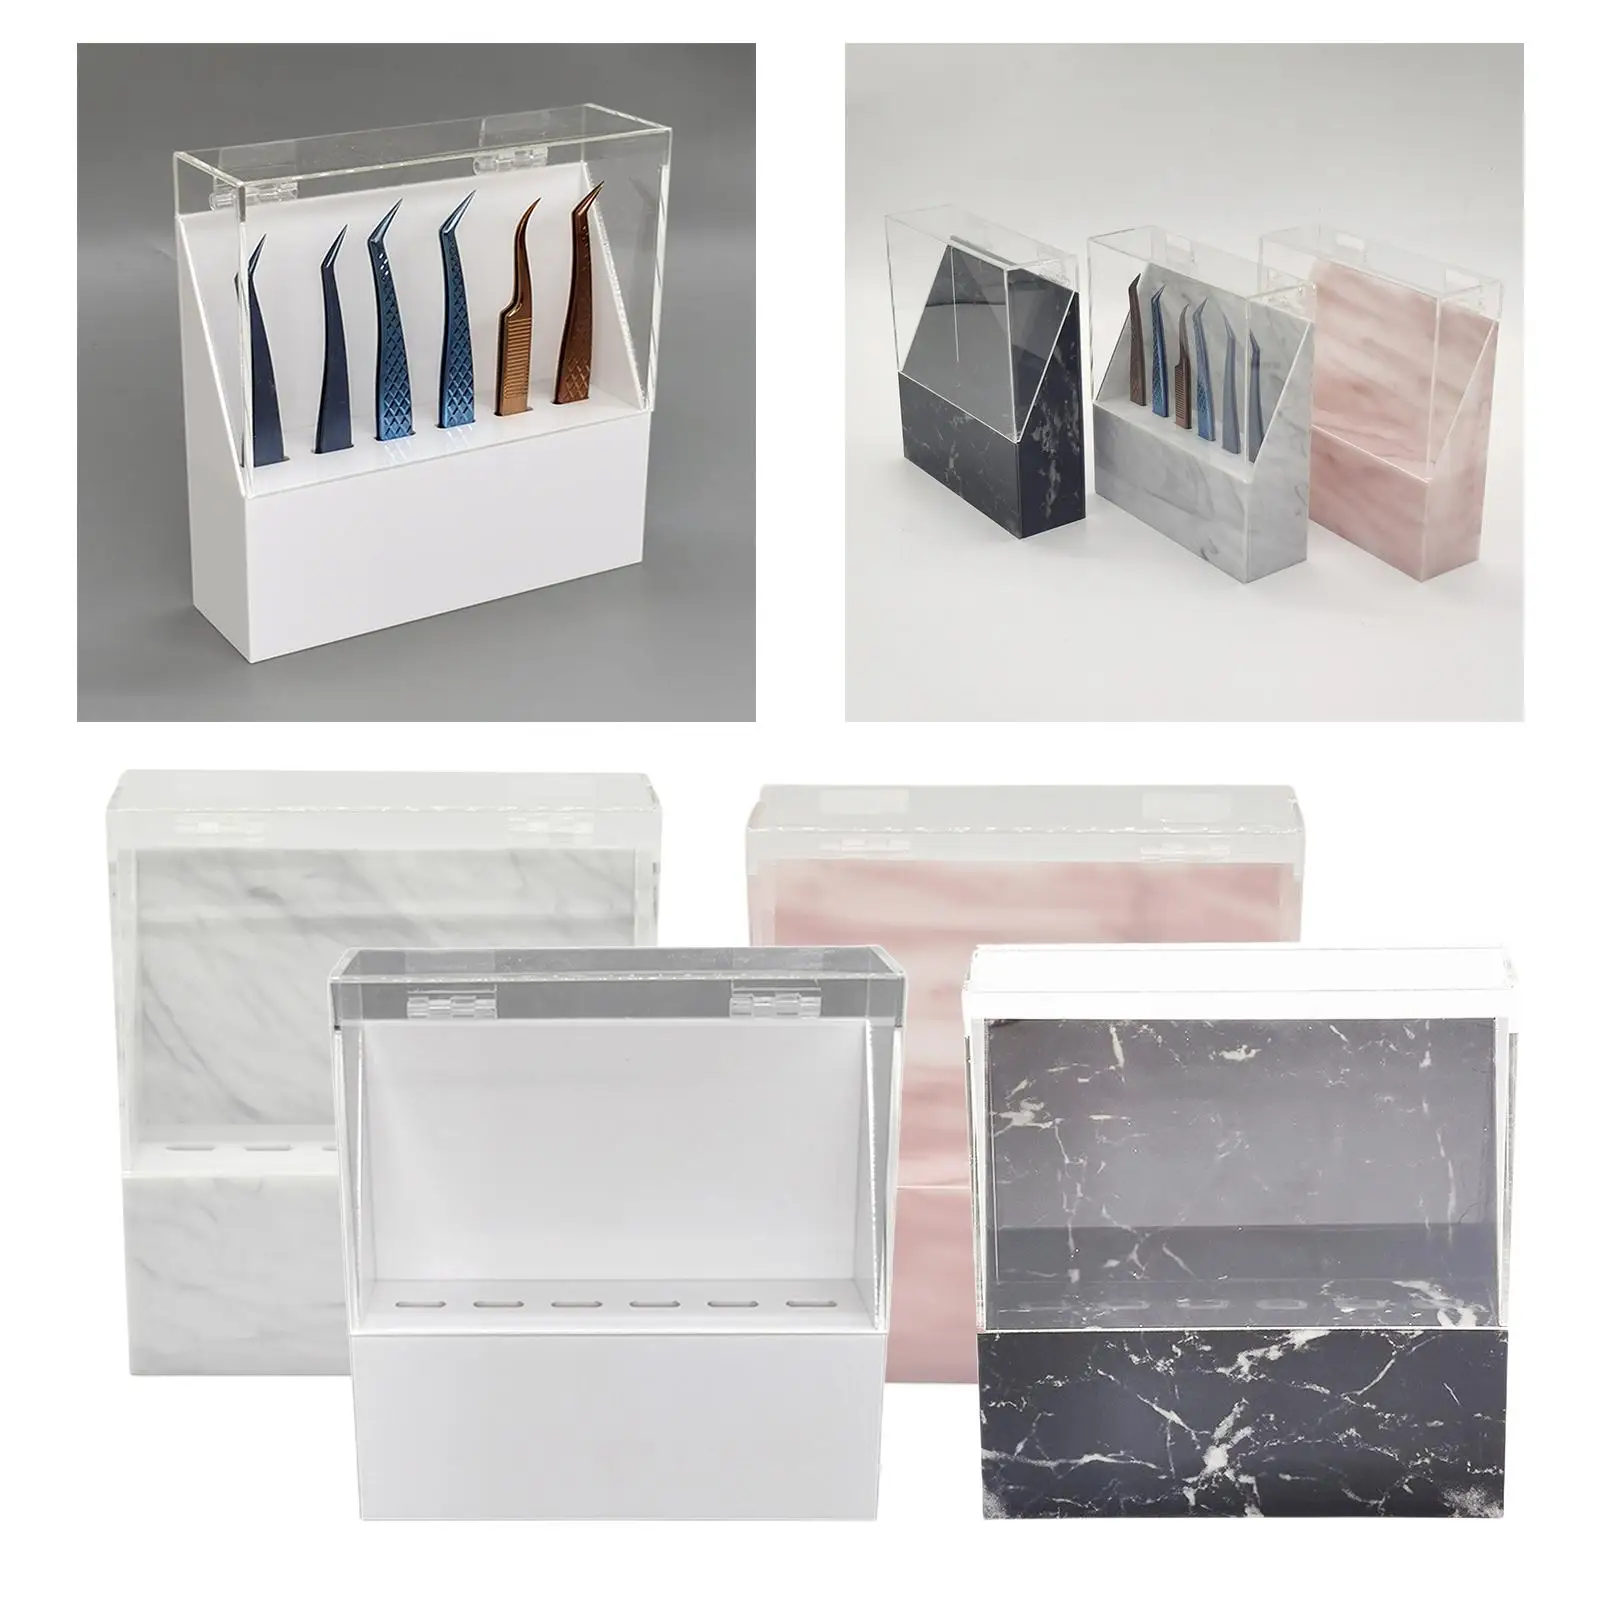   Holder for Extension, Premium Acrylic  Display  DustCover 6